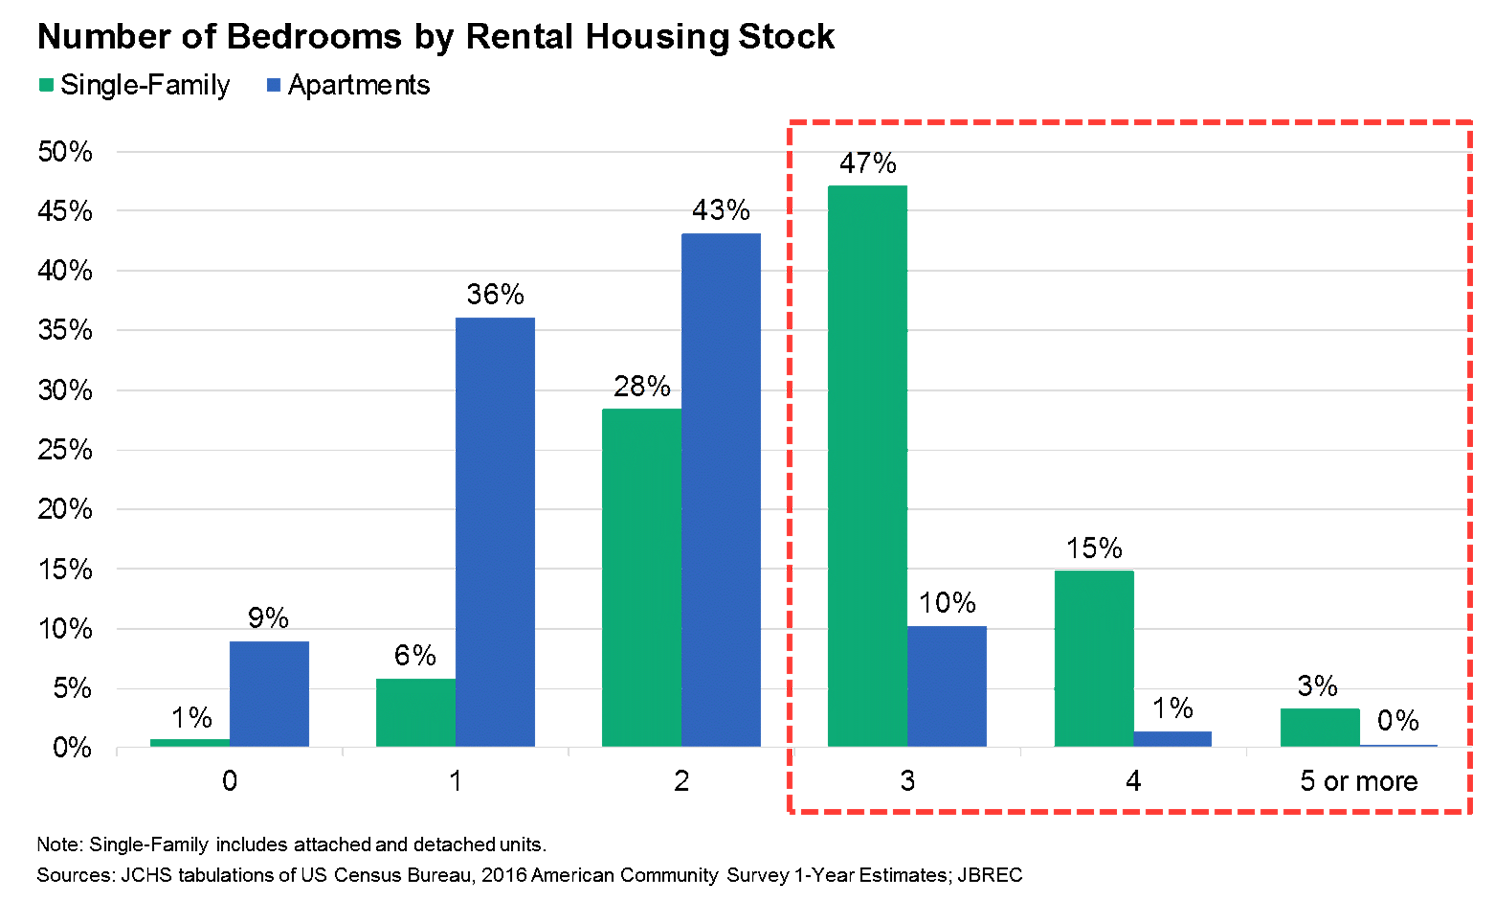 Renters prefer single-family homes because of their size advantage over traditional apartments.